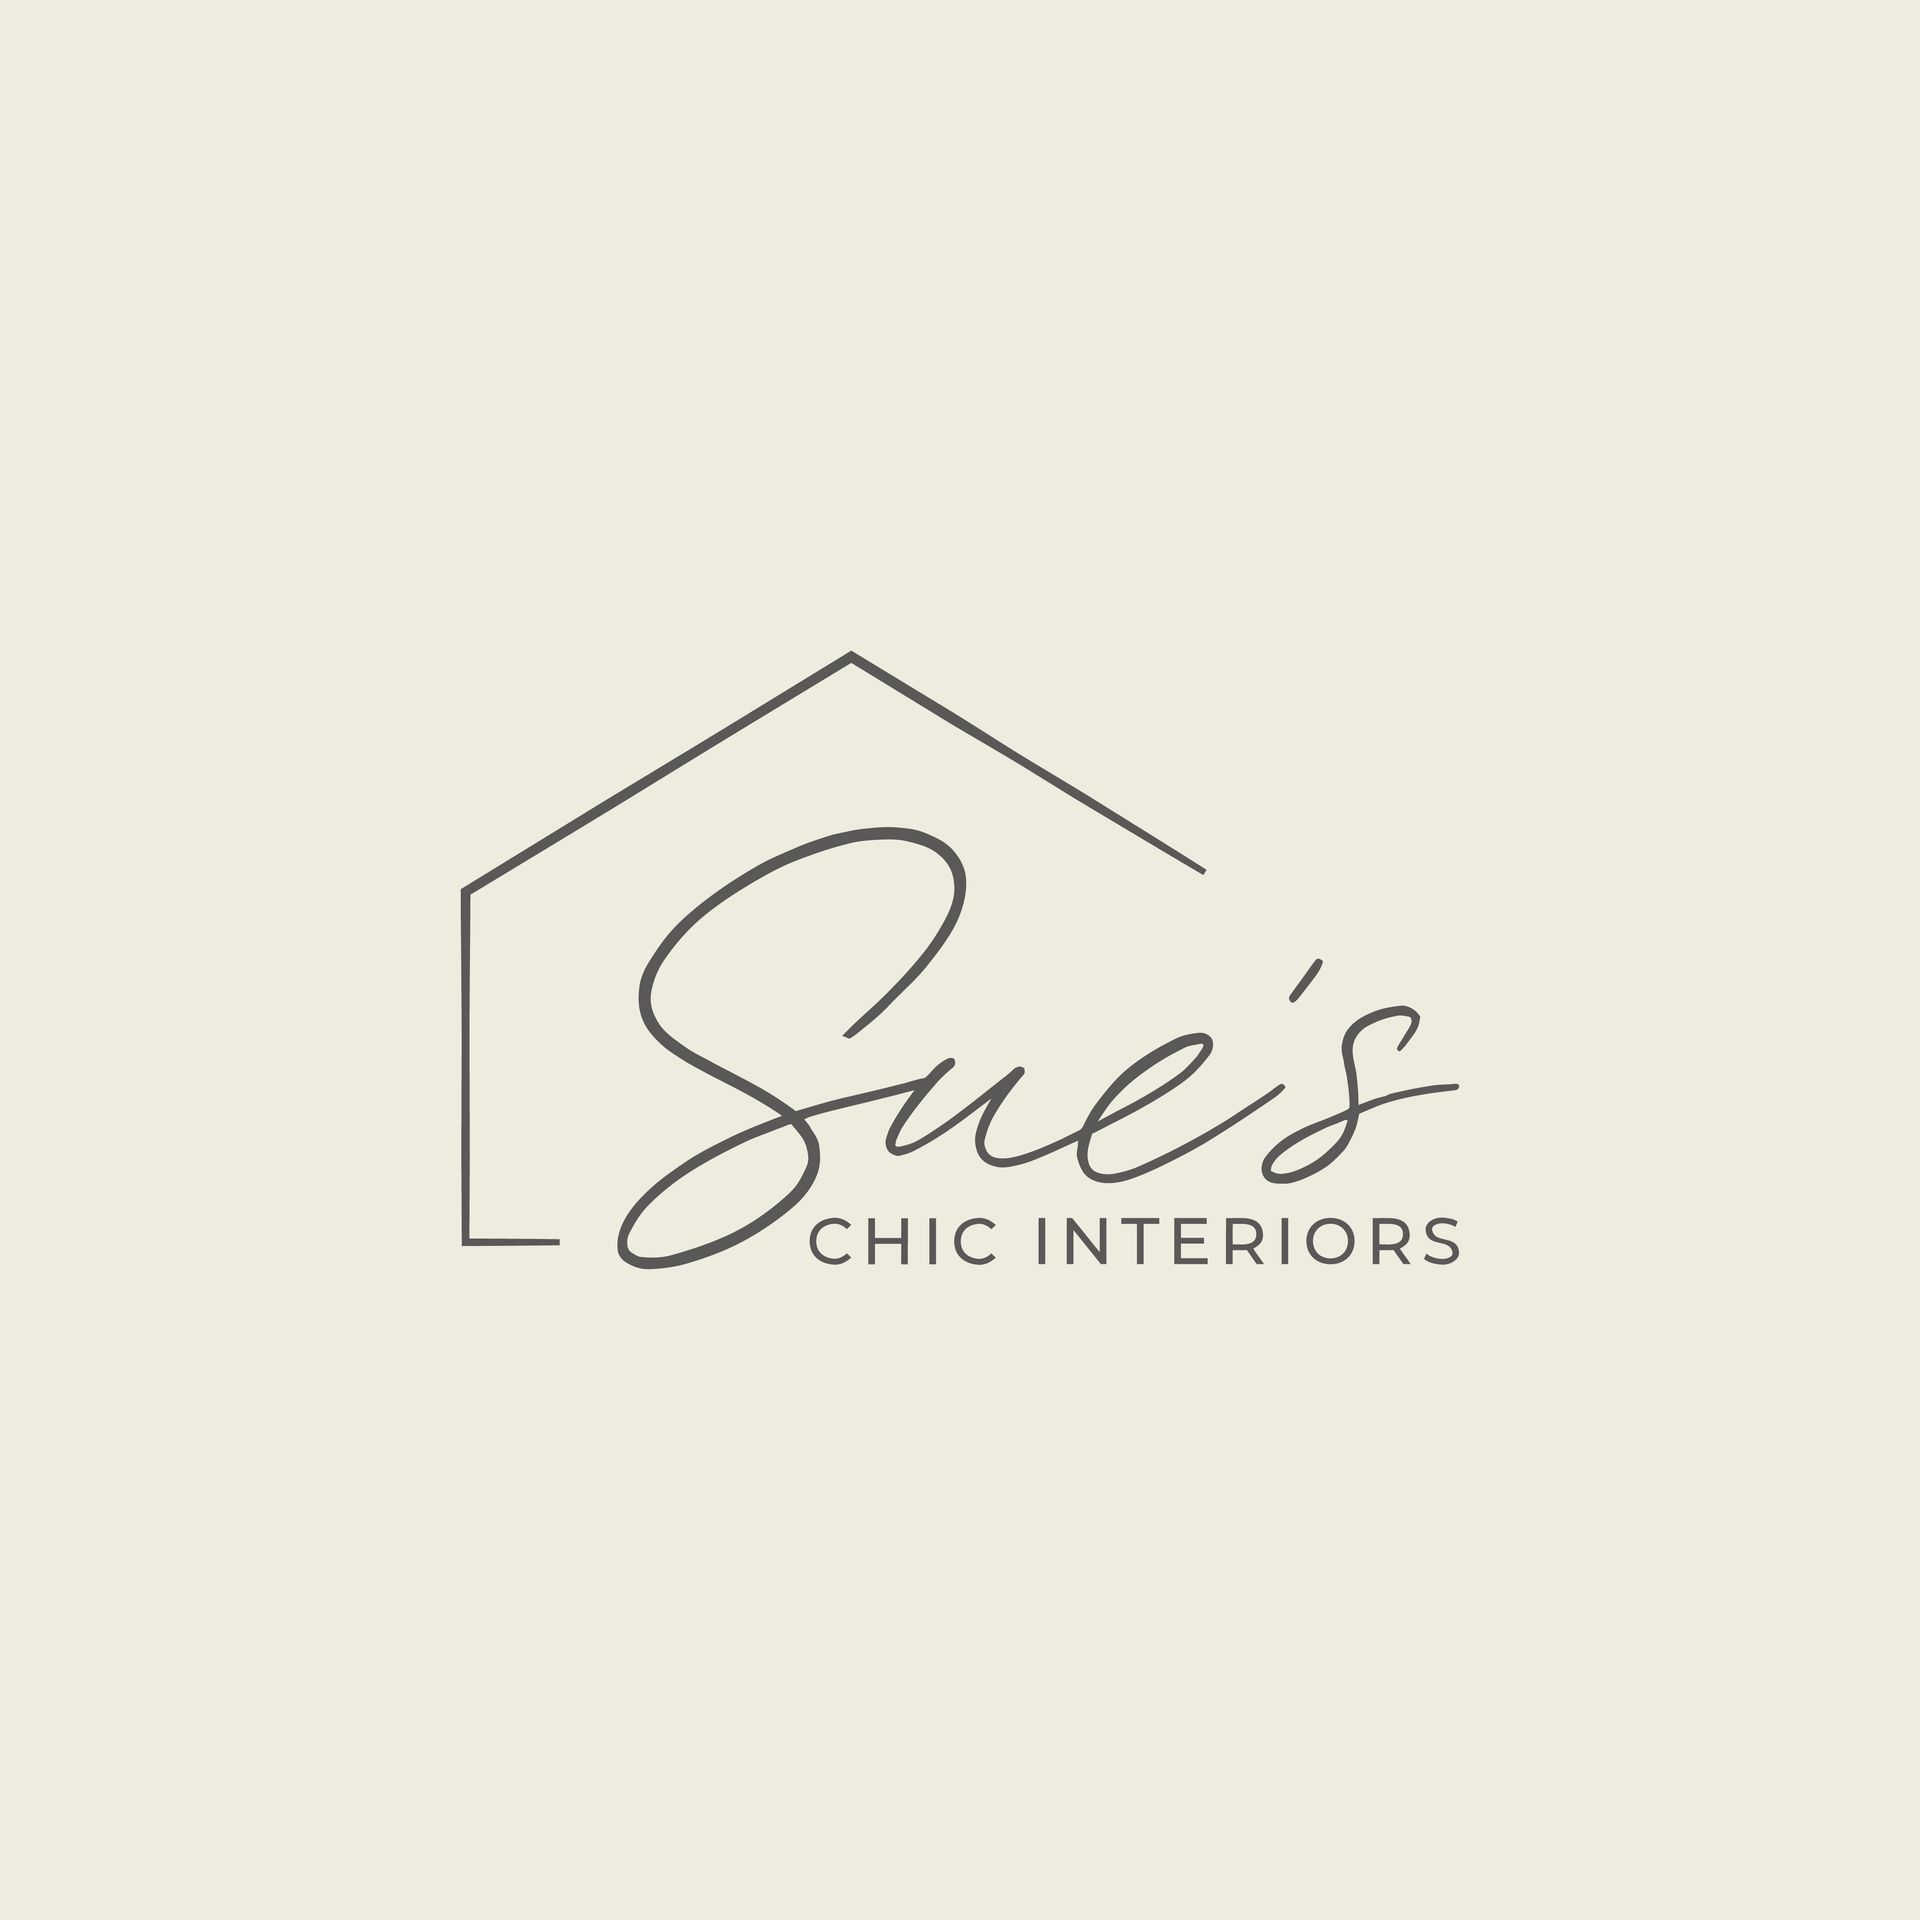 A logo for a company called sue 's chic interiors.